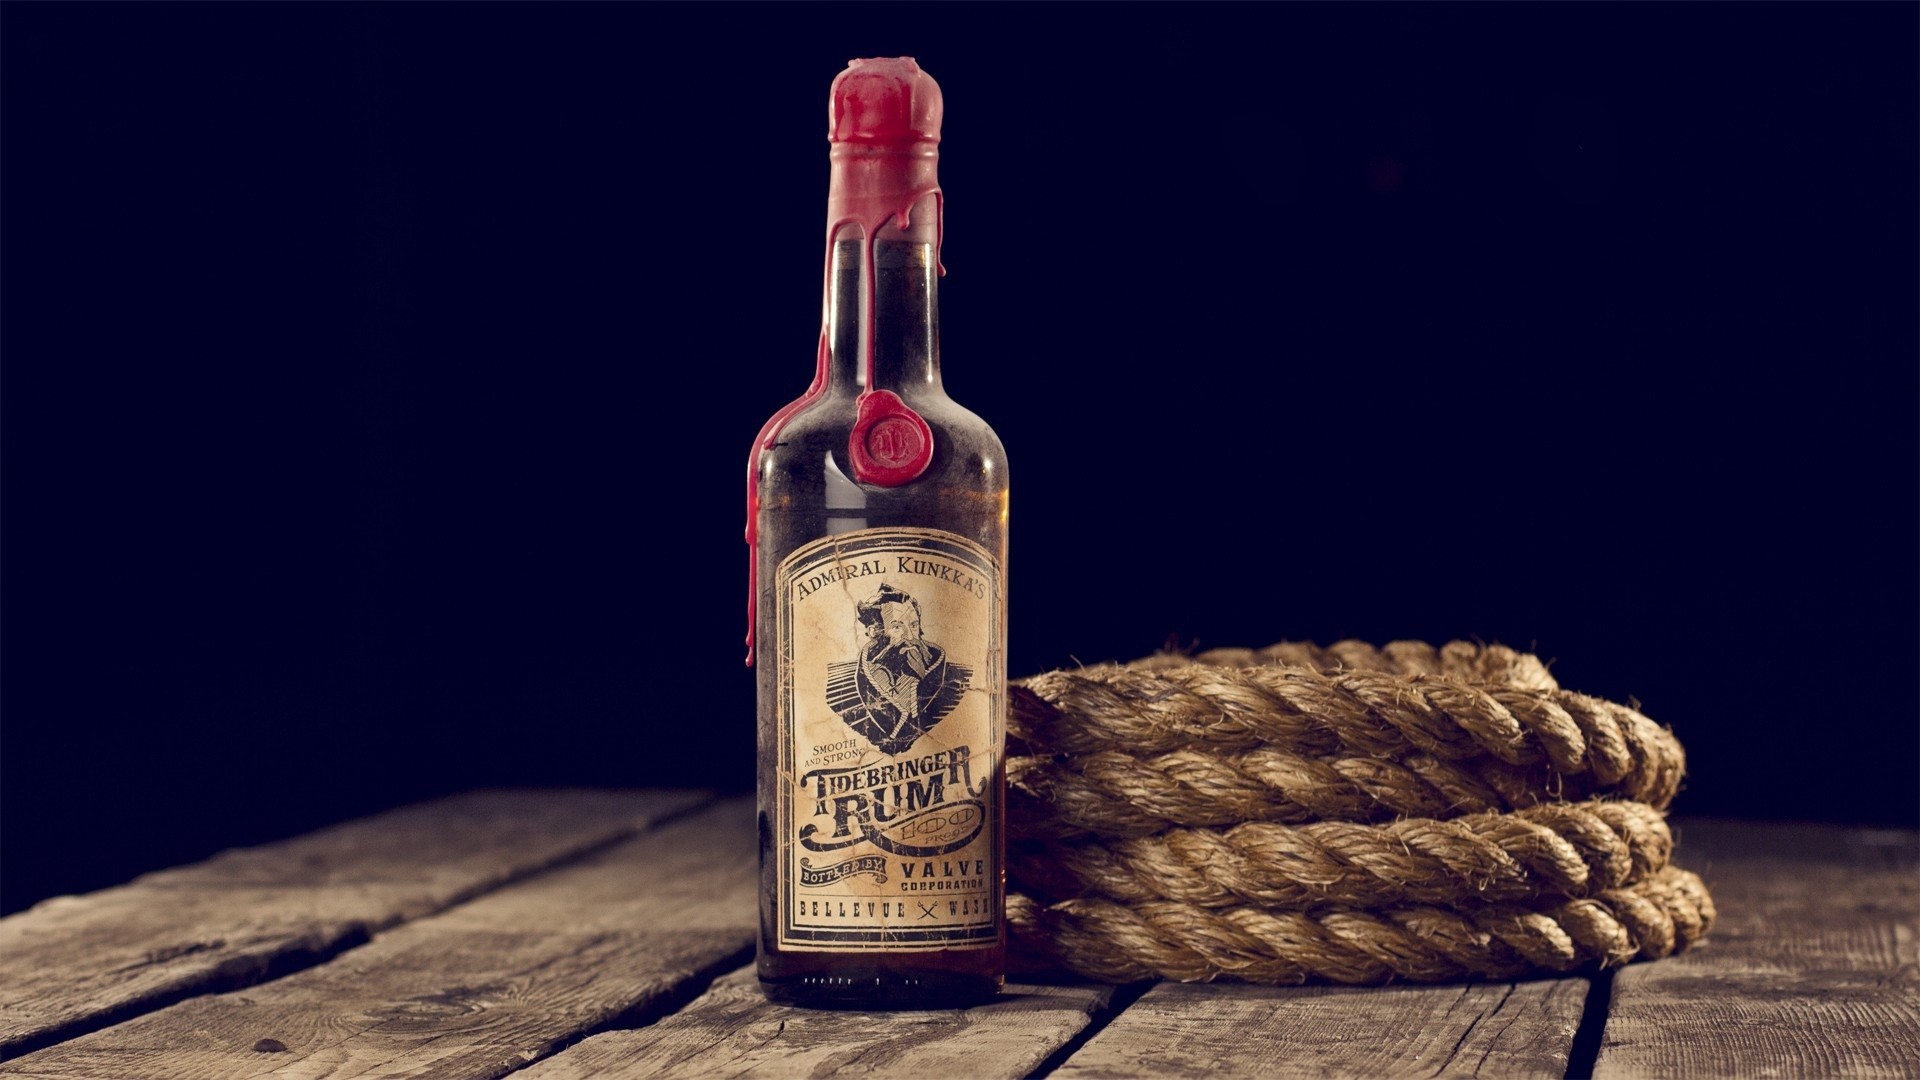 http://www.zastavki.com/pictures/originals/2015/Creative_Wallpaper_A_bottle_of_rum_and_ship_ropes_096078_.jpg